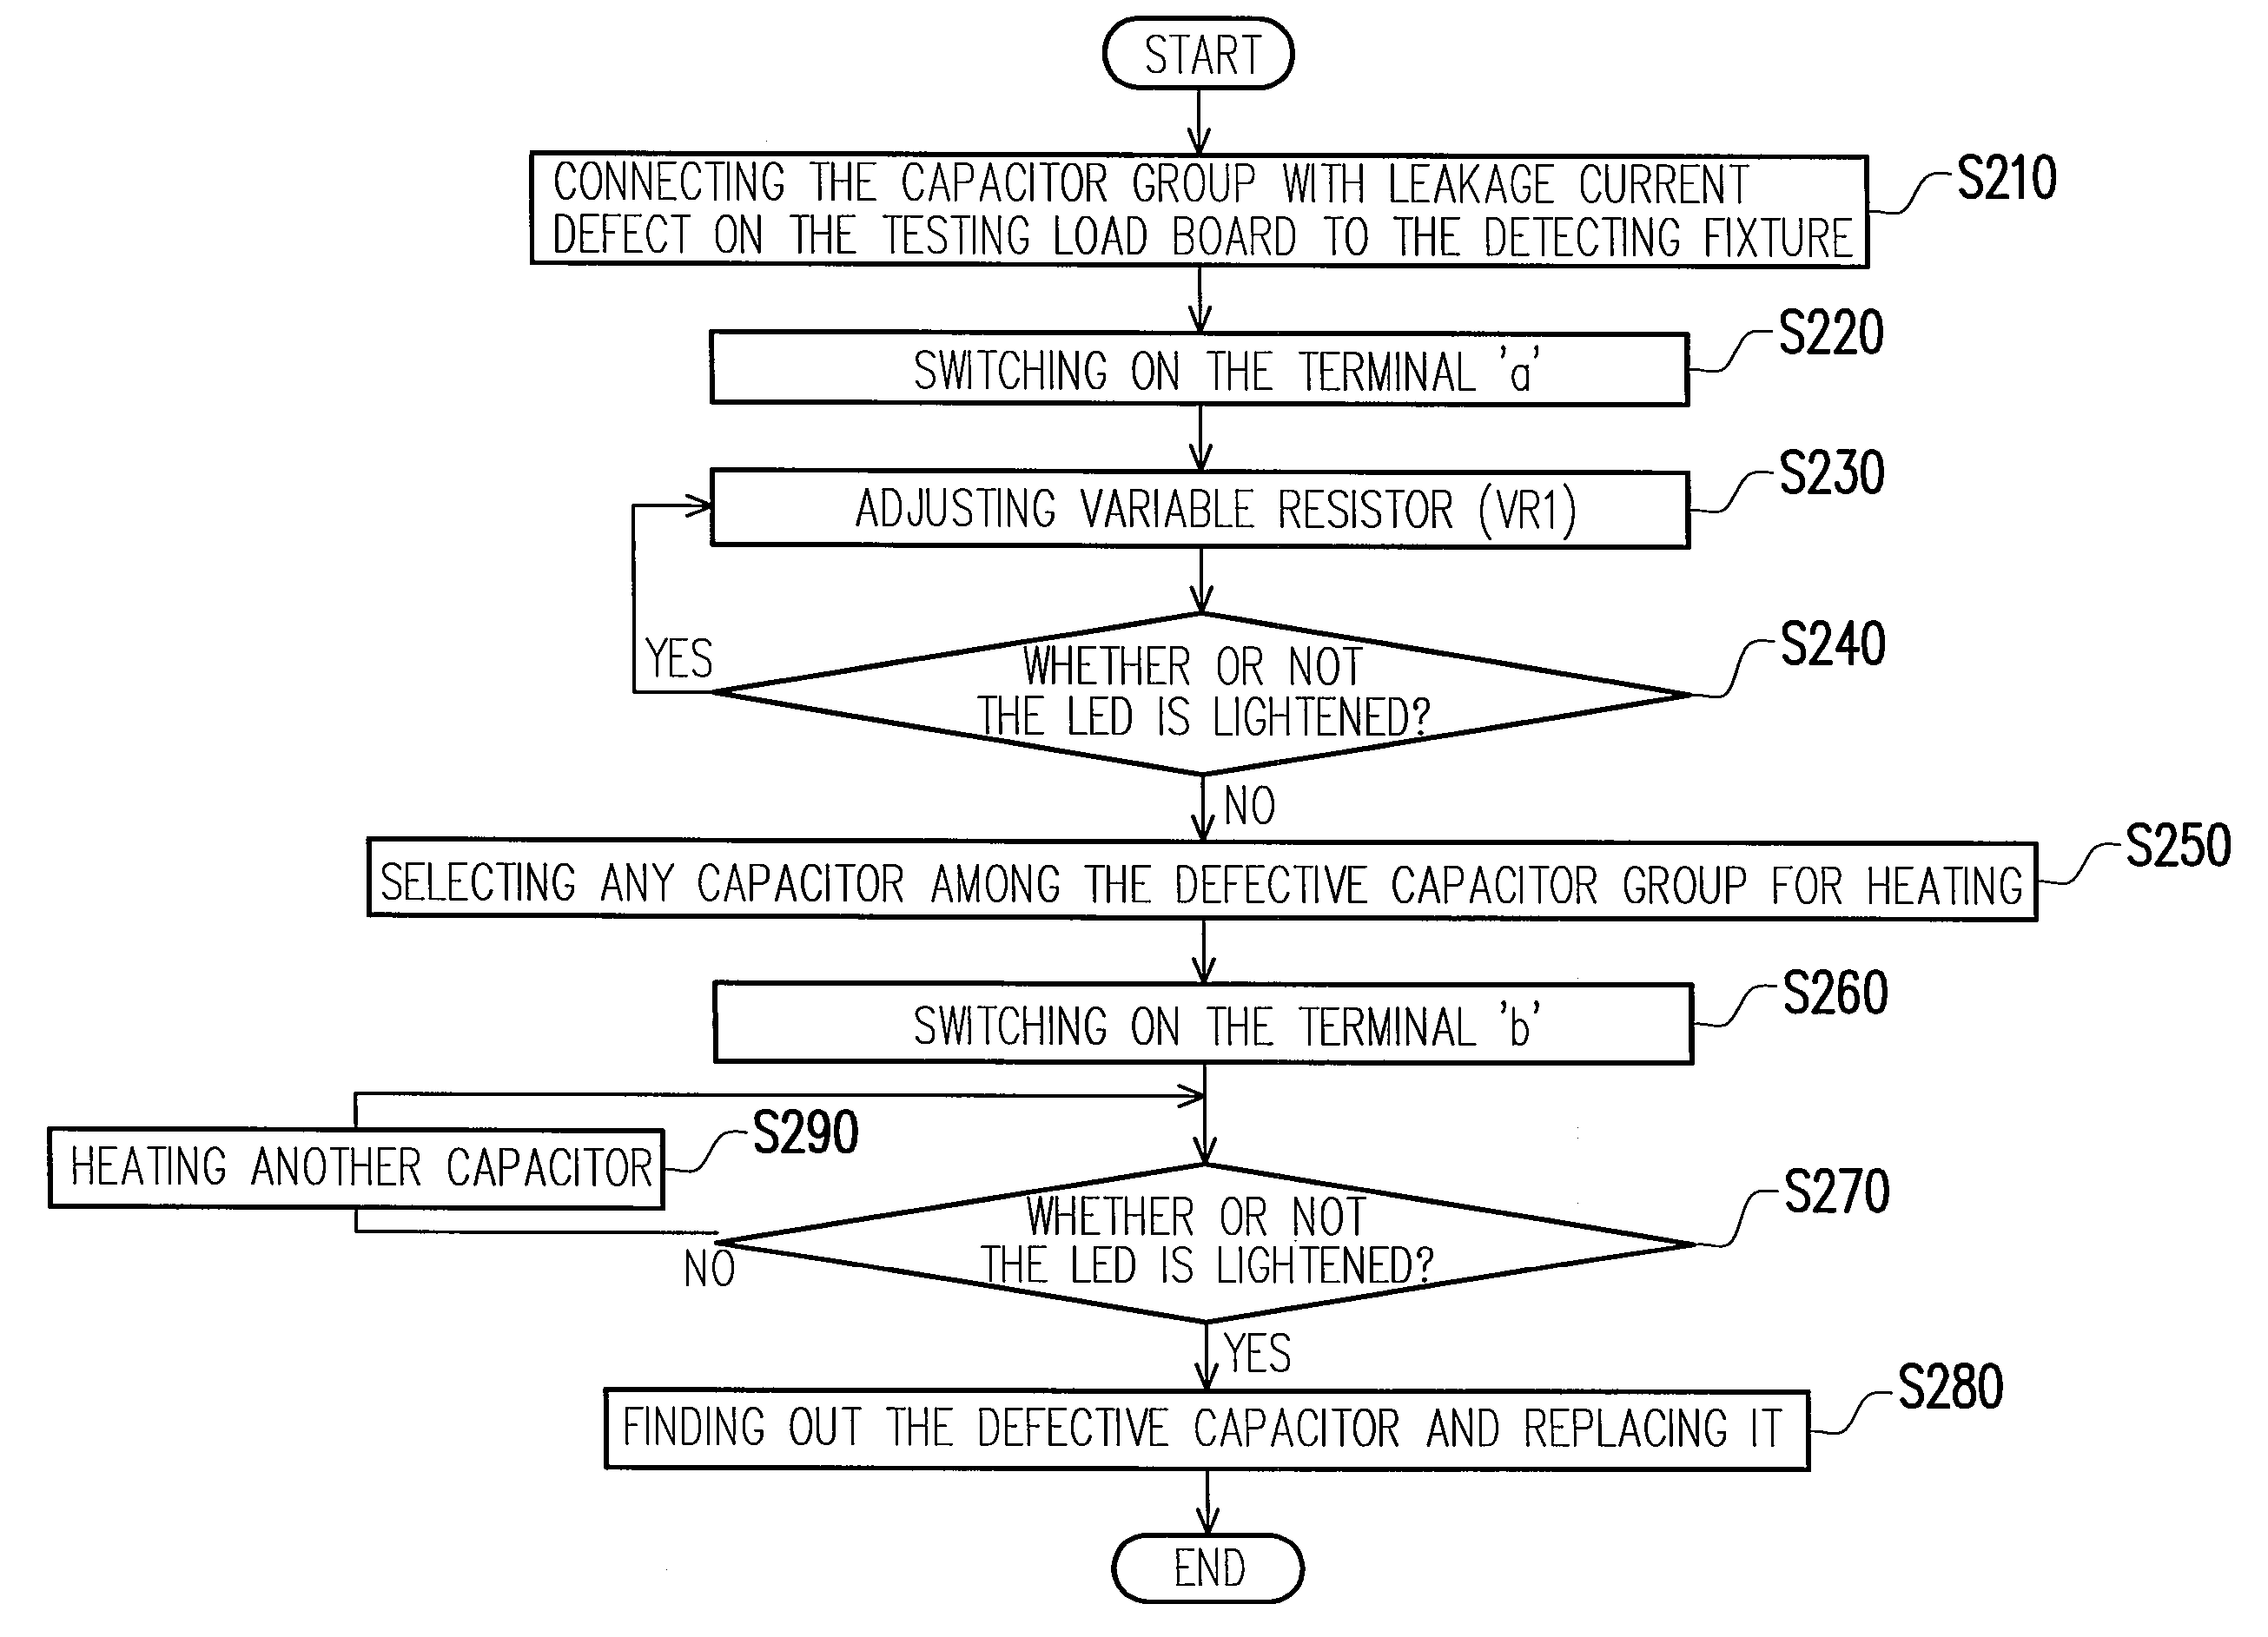 Detecting fixture and method thereof for detecting capacitors